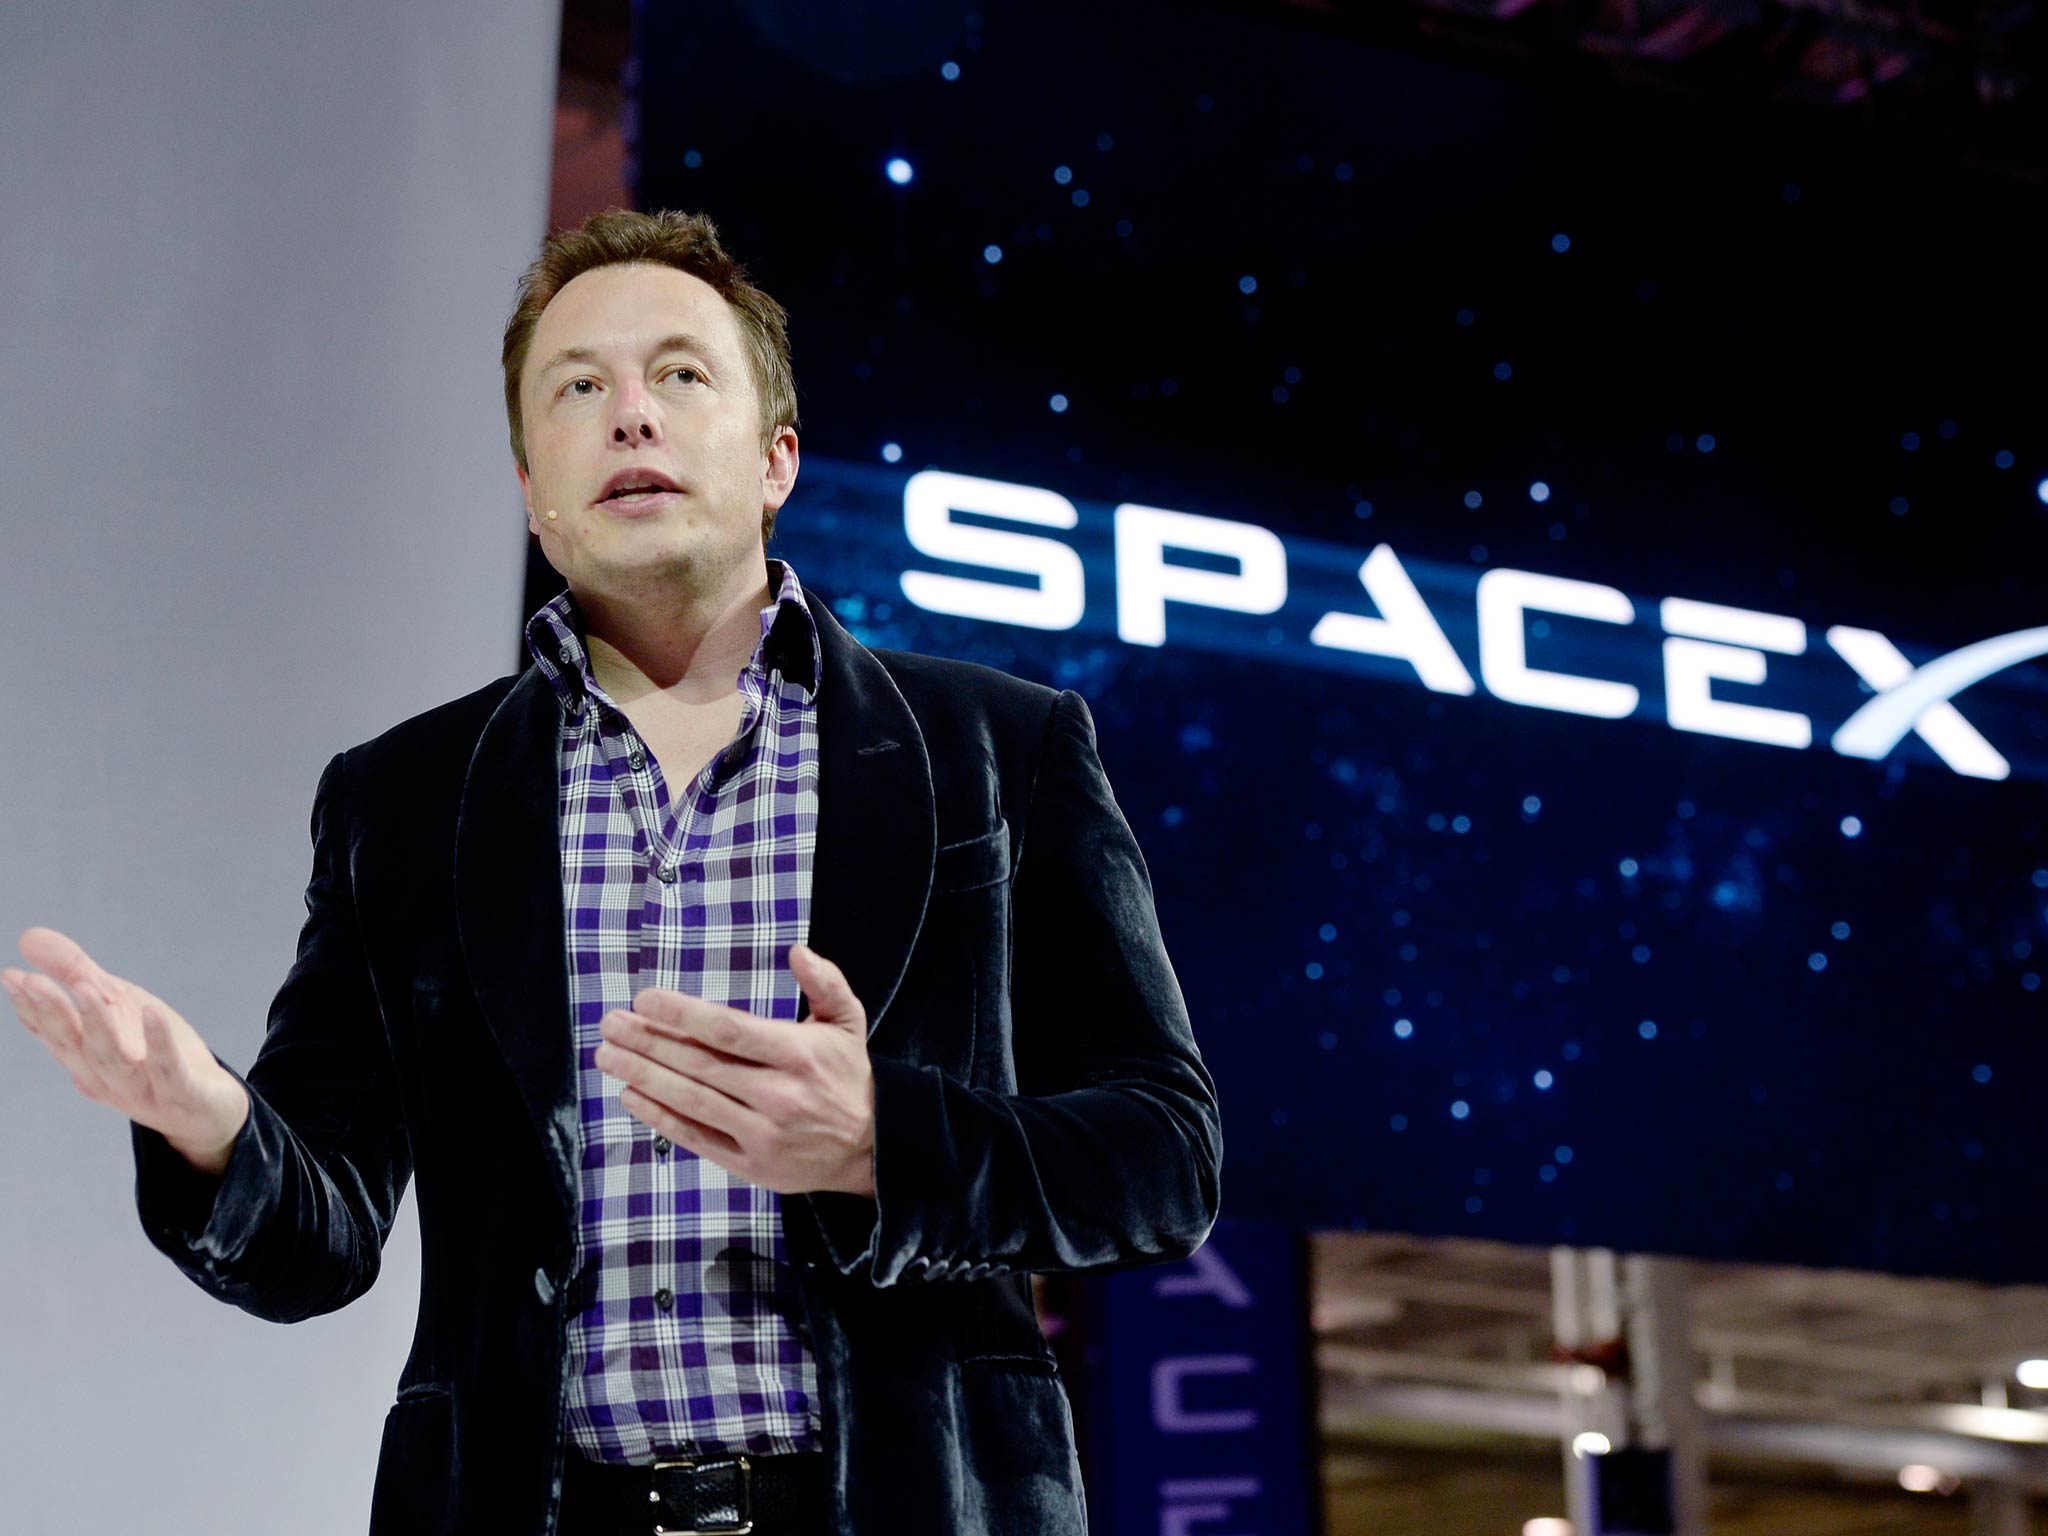 SpaceX chief executive Elon Musk wants to test the company's Falcon Heavy rocket next month